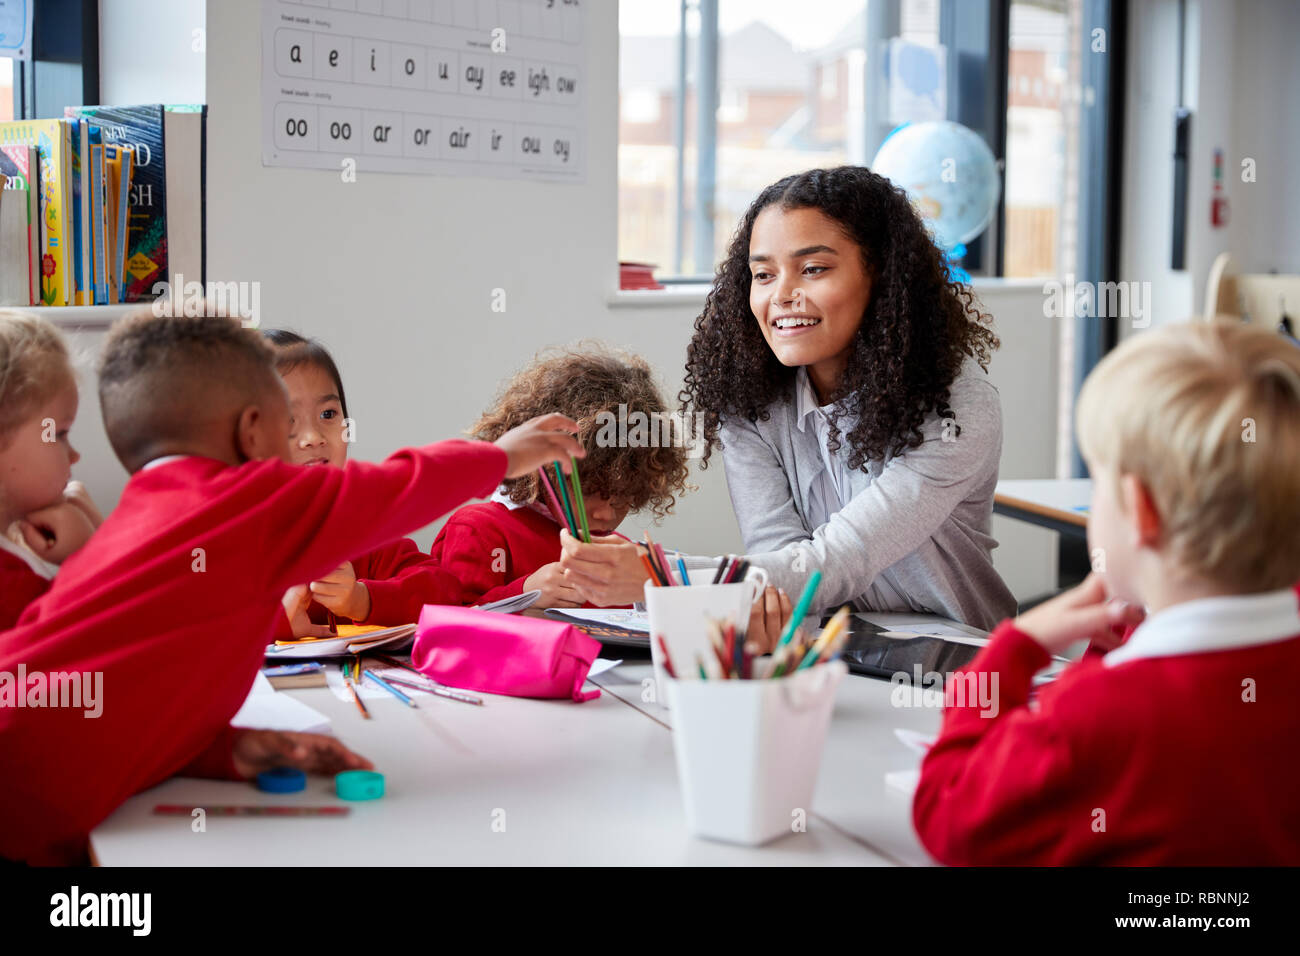 Front view of smiling female infant school teacher sitting at a table in the classroom with a group of schoolchildren Stock Photo